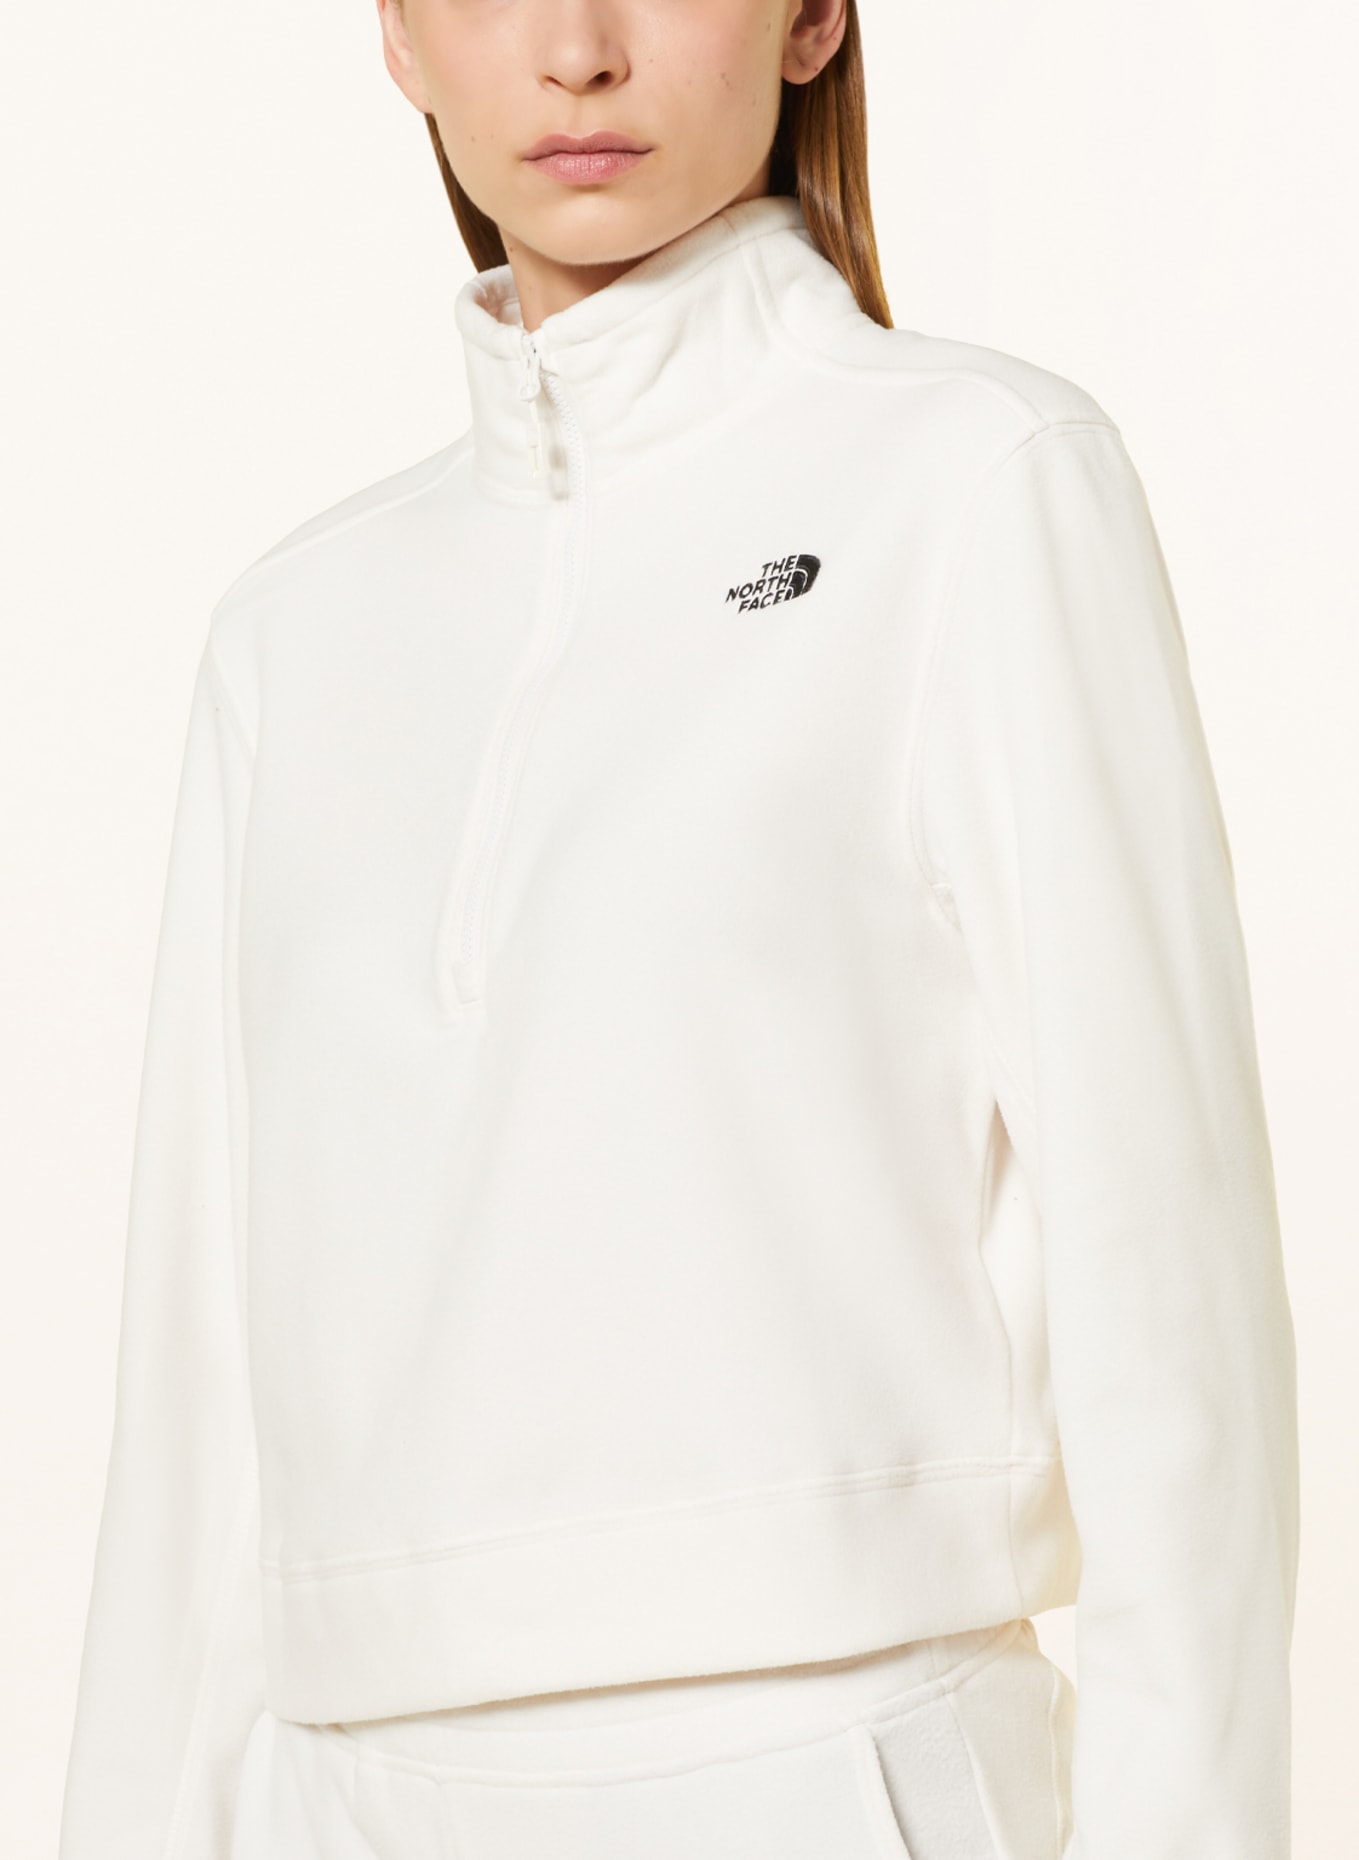 THE NORTH FACE Undershirt 100 GLACIER, Color: WHITE (Image 4)